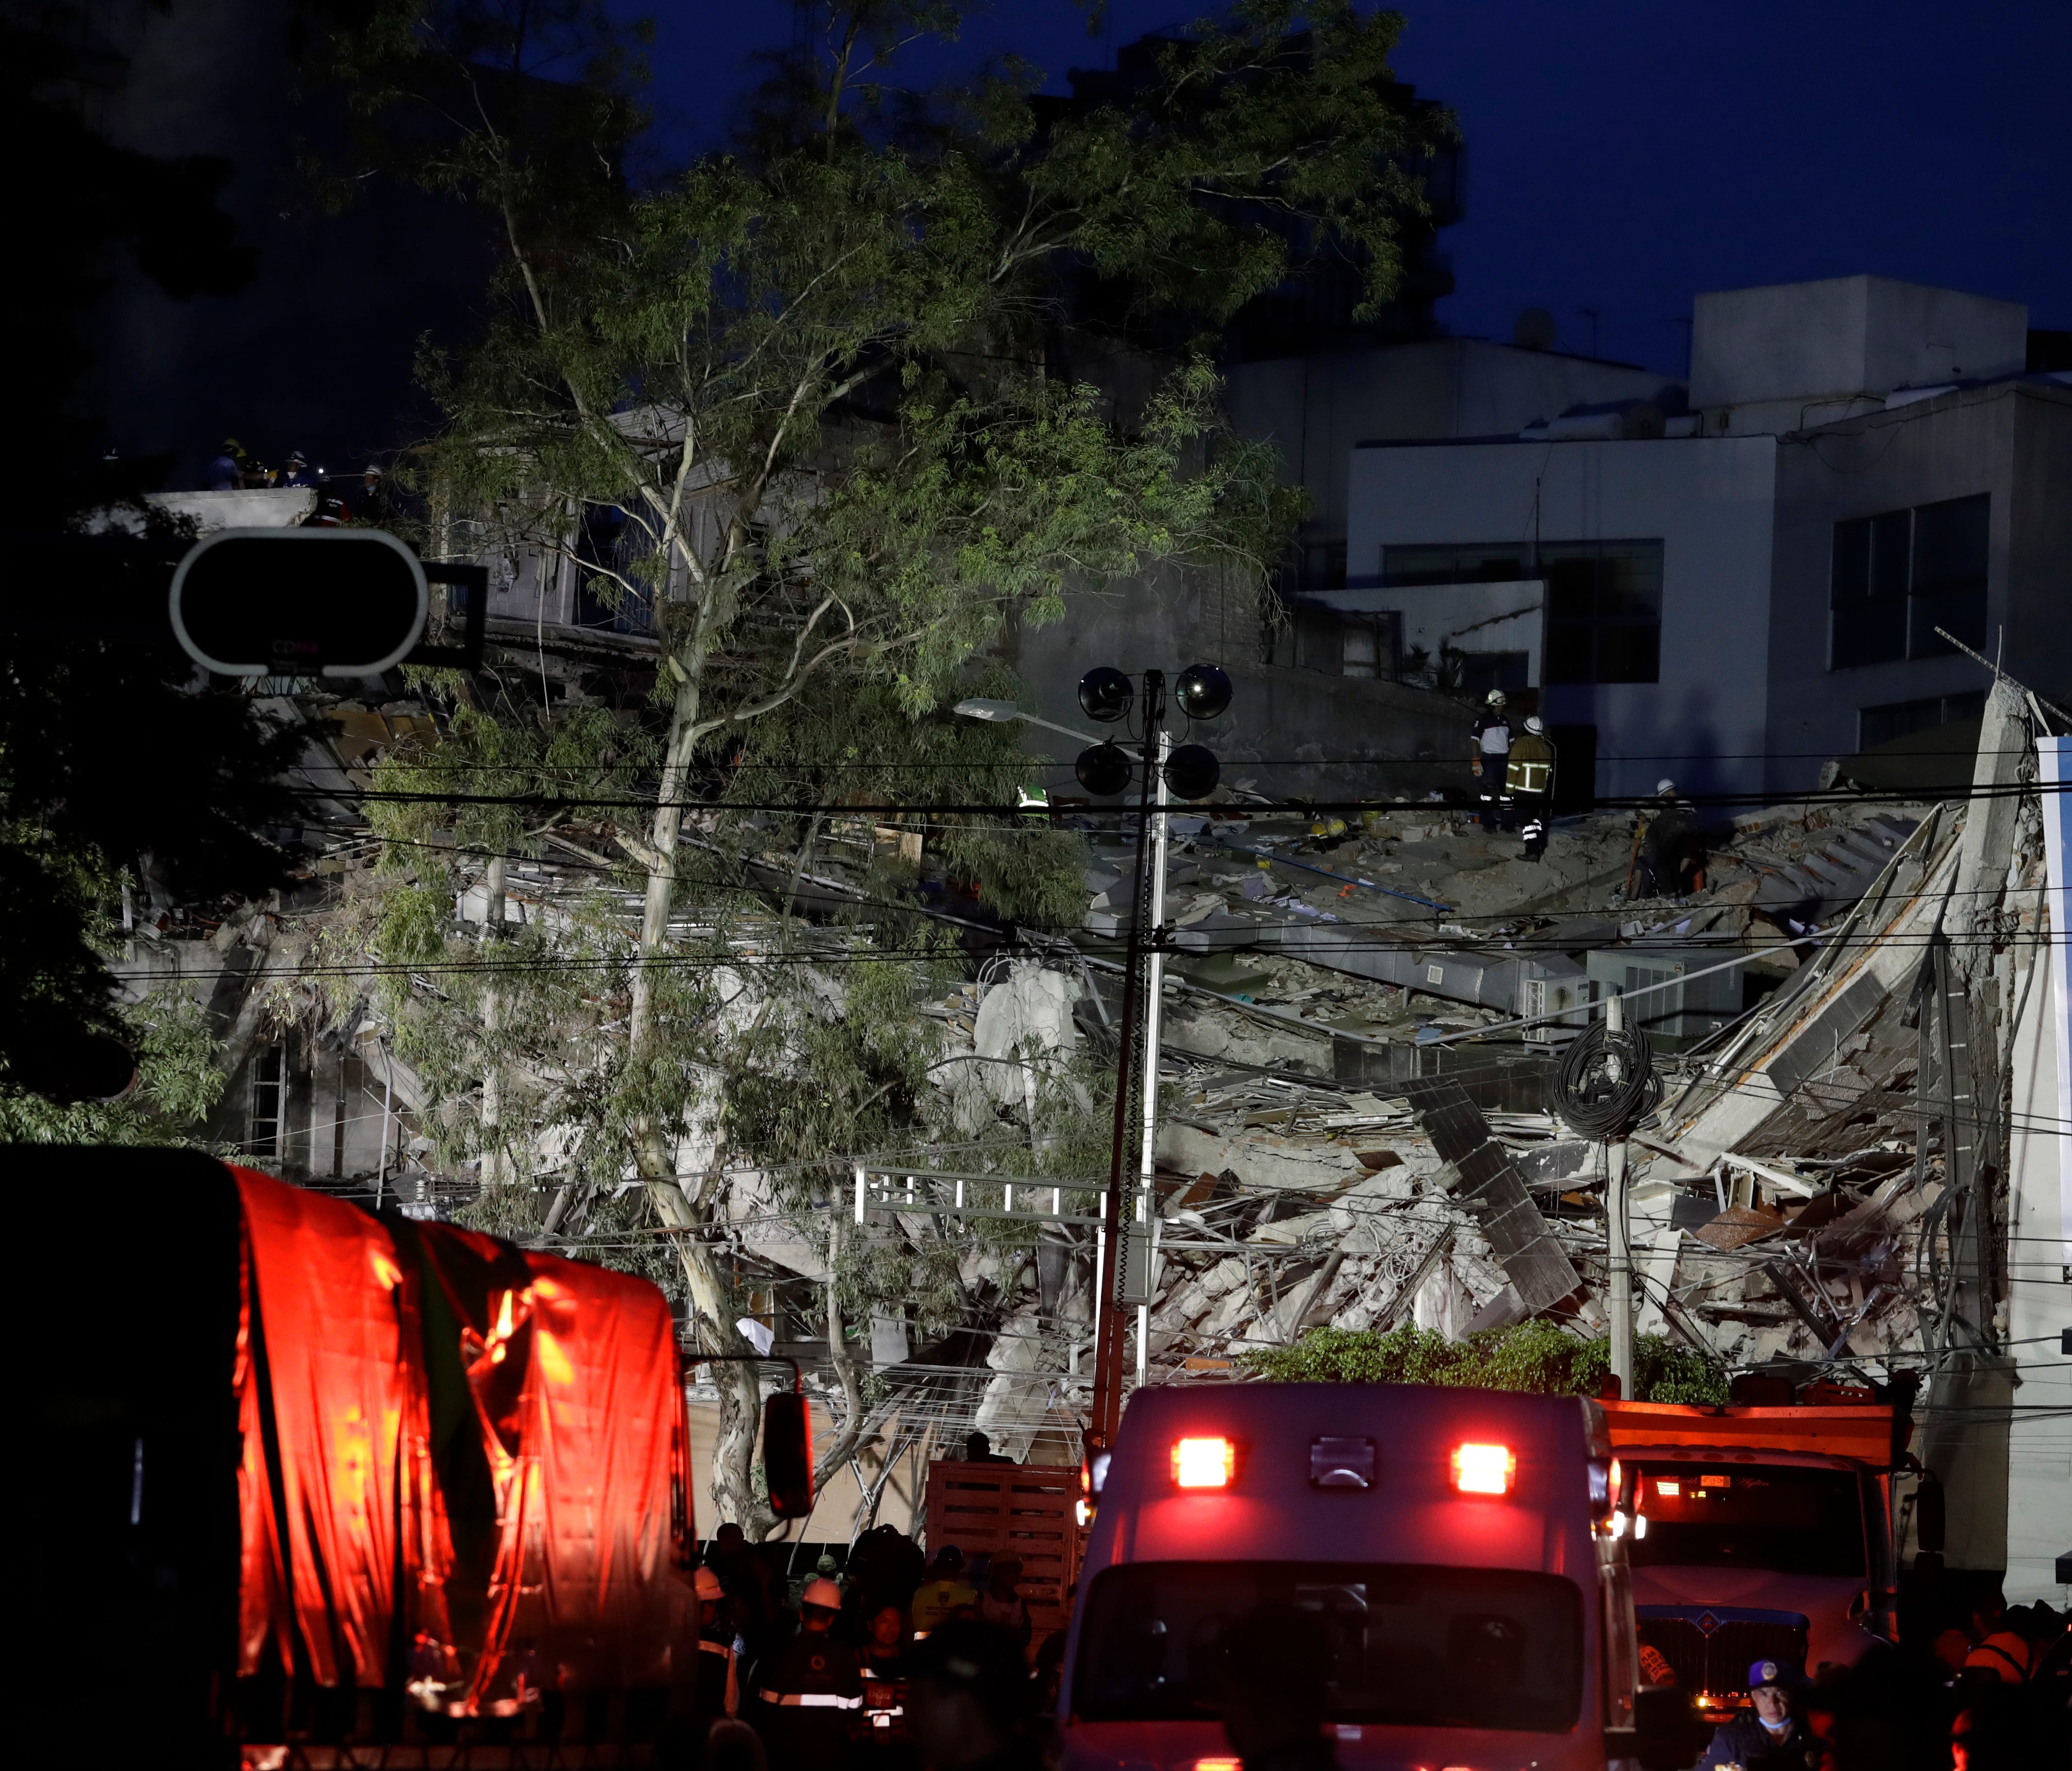 Rescue workers continue to search through rubble in a collapsed building in the Roma neighborhood, in Mexico City, as night falls on Tuesday.